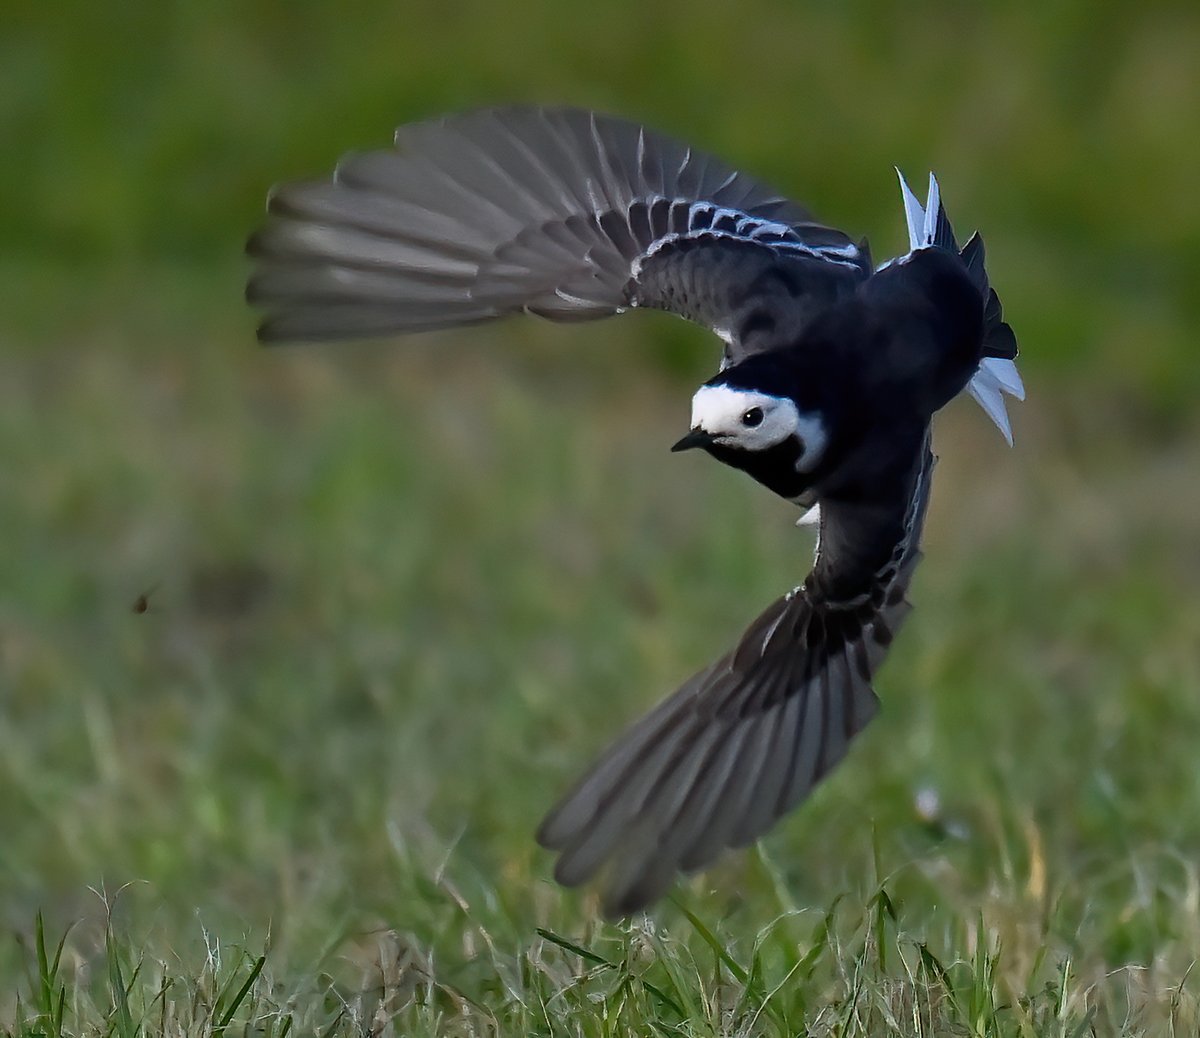 Pied Wagtail after a fly! 😊 Taken recently in my Somerset village. Good morning everyone. 👋🐦